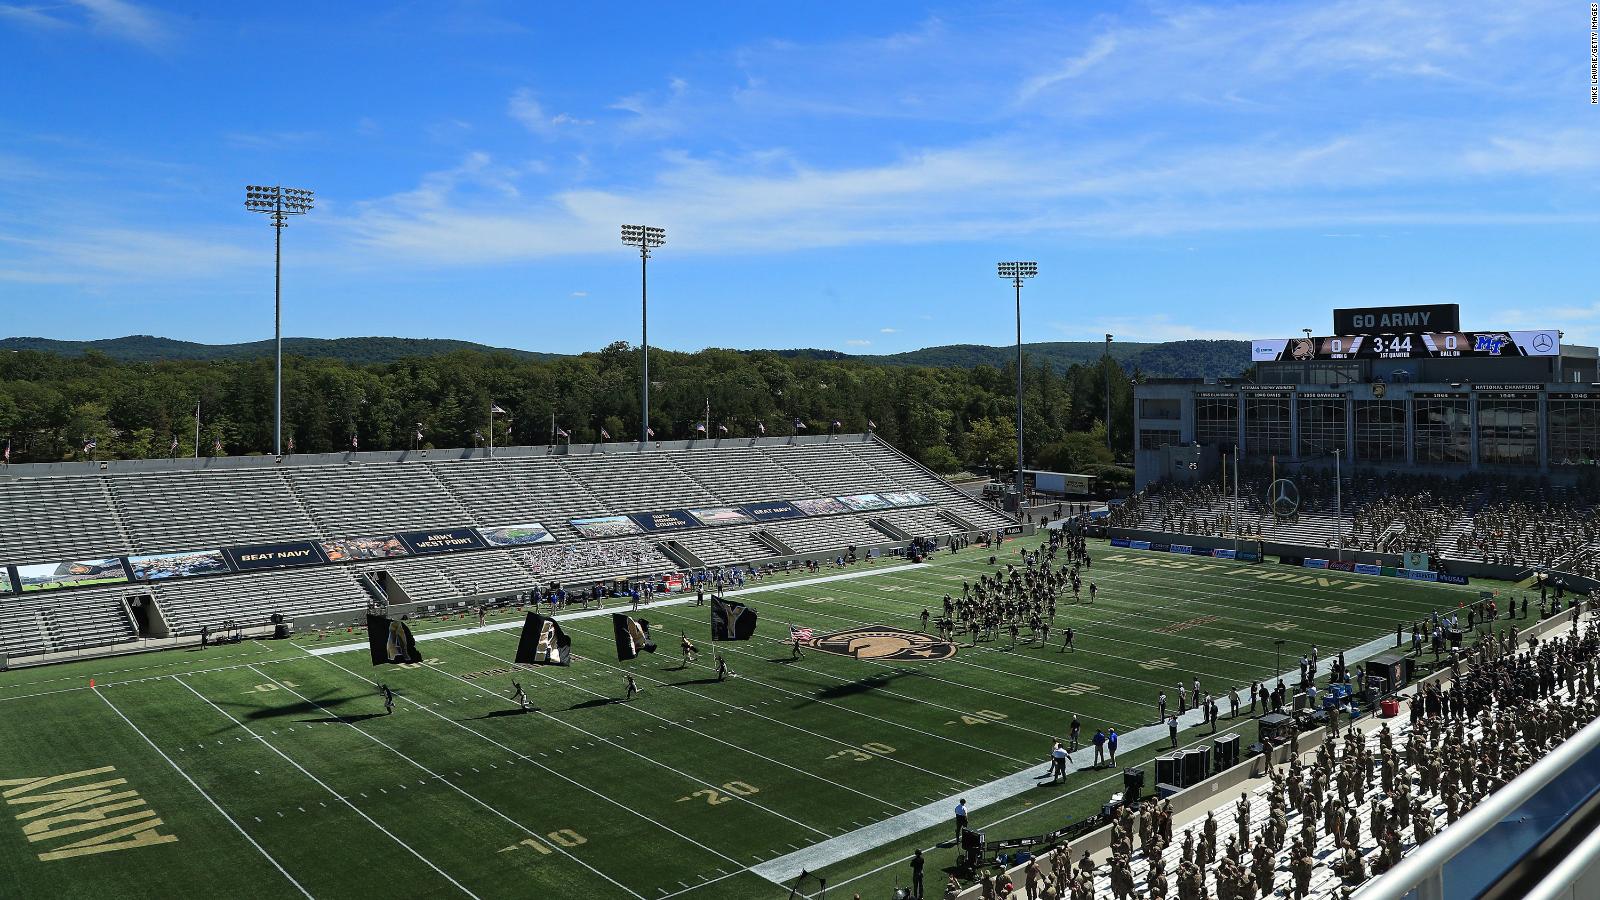 ArmyNavy football game will be played at West Point for first time